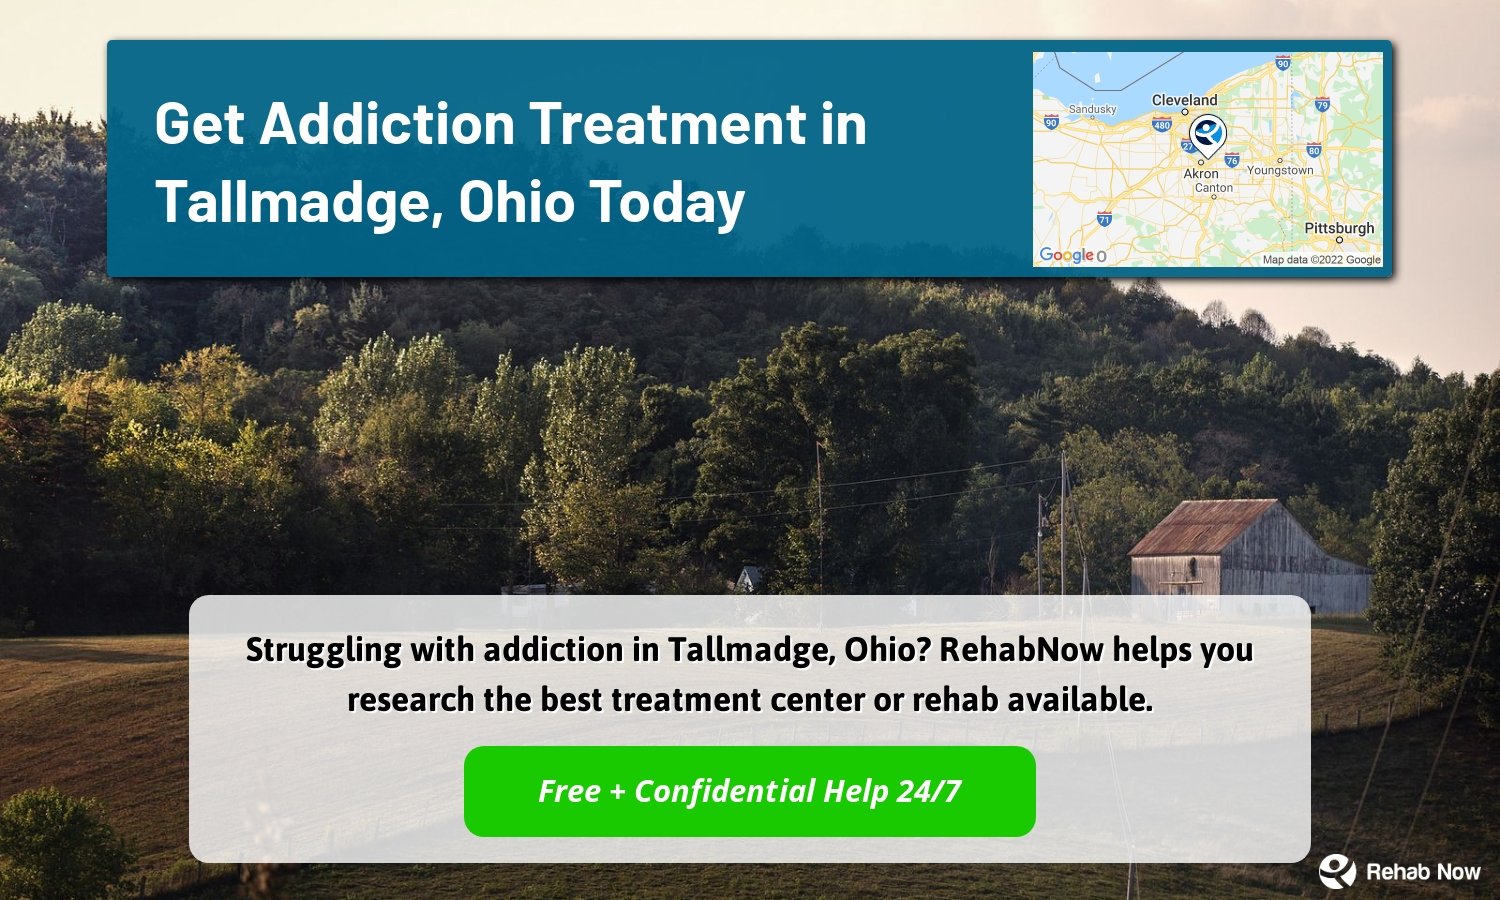 Struggling with addiction in Tallmadge, Ohio? RehabNow helps you research the best treatment center or rehab available.